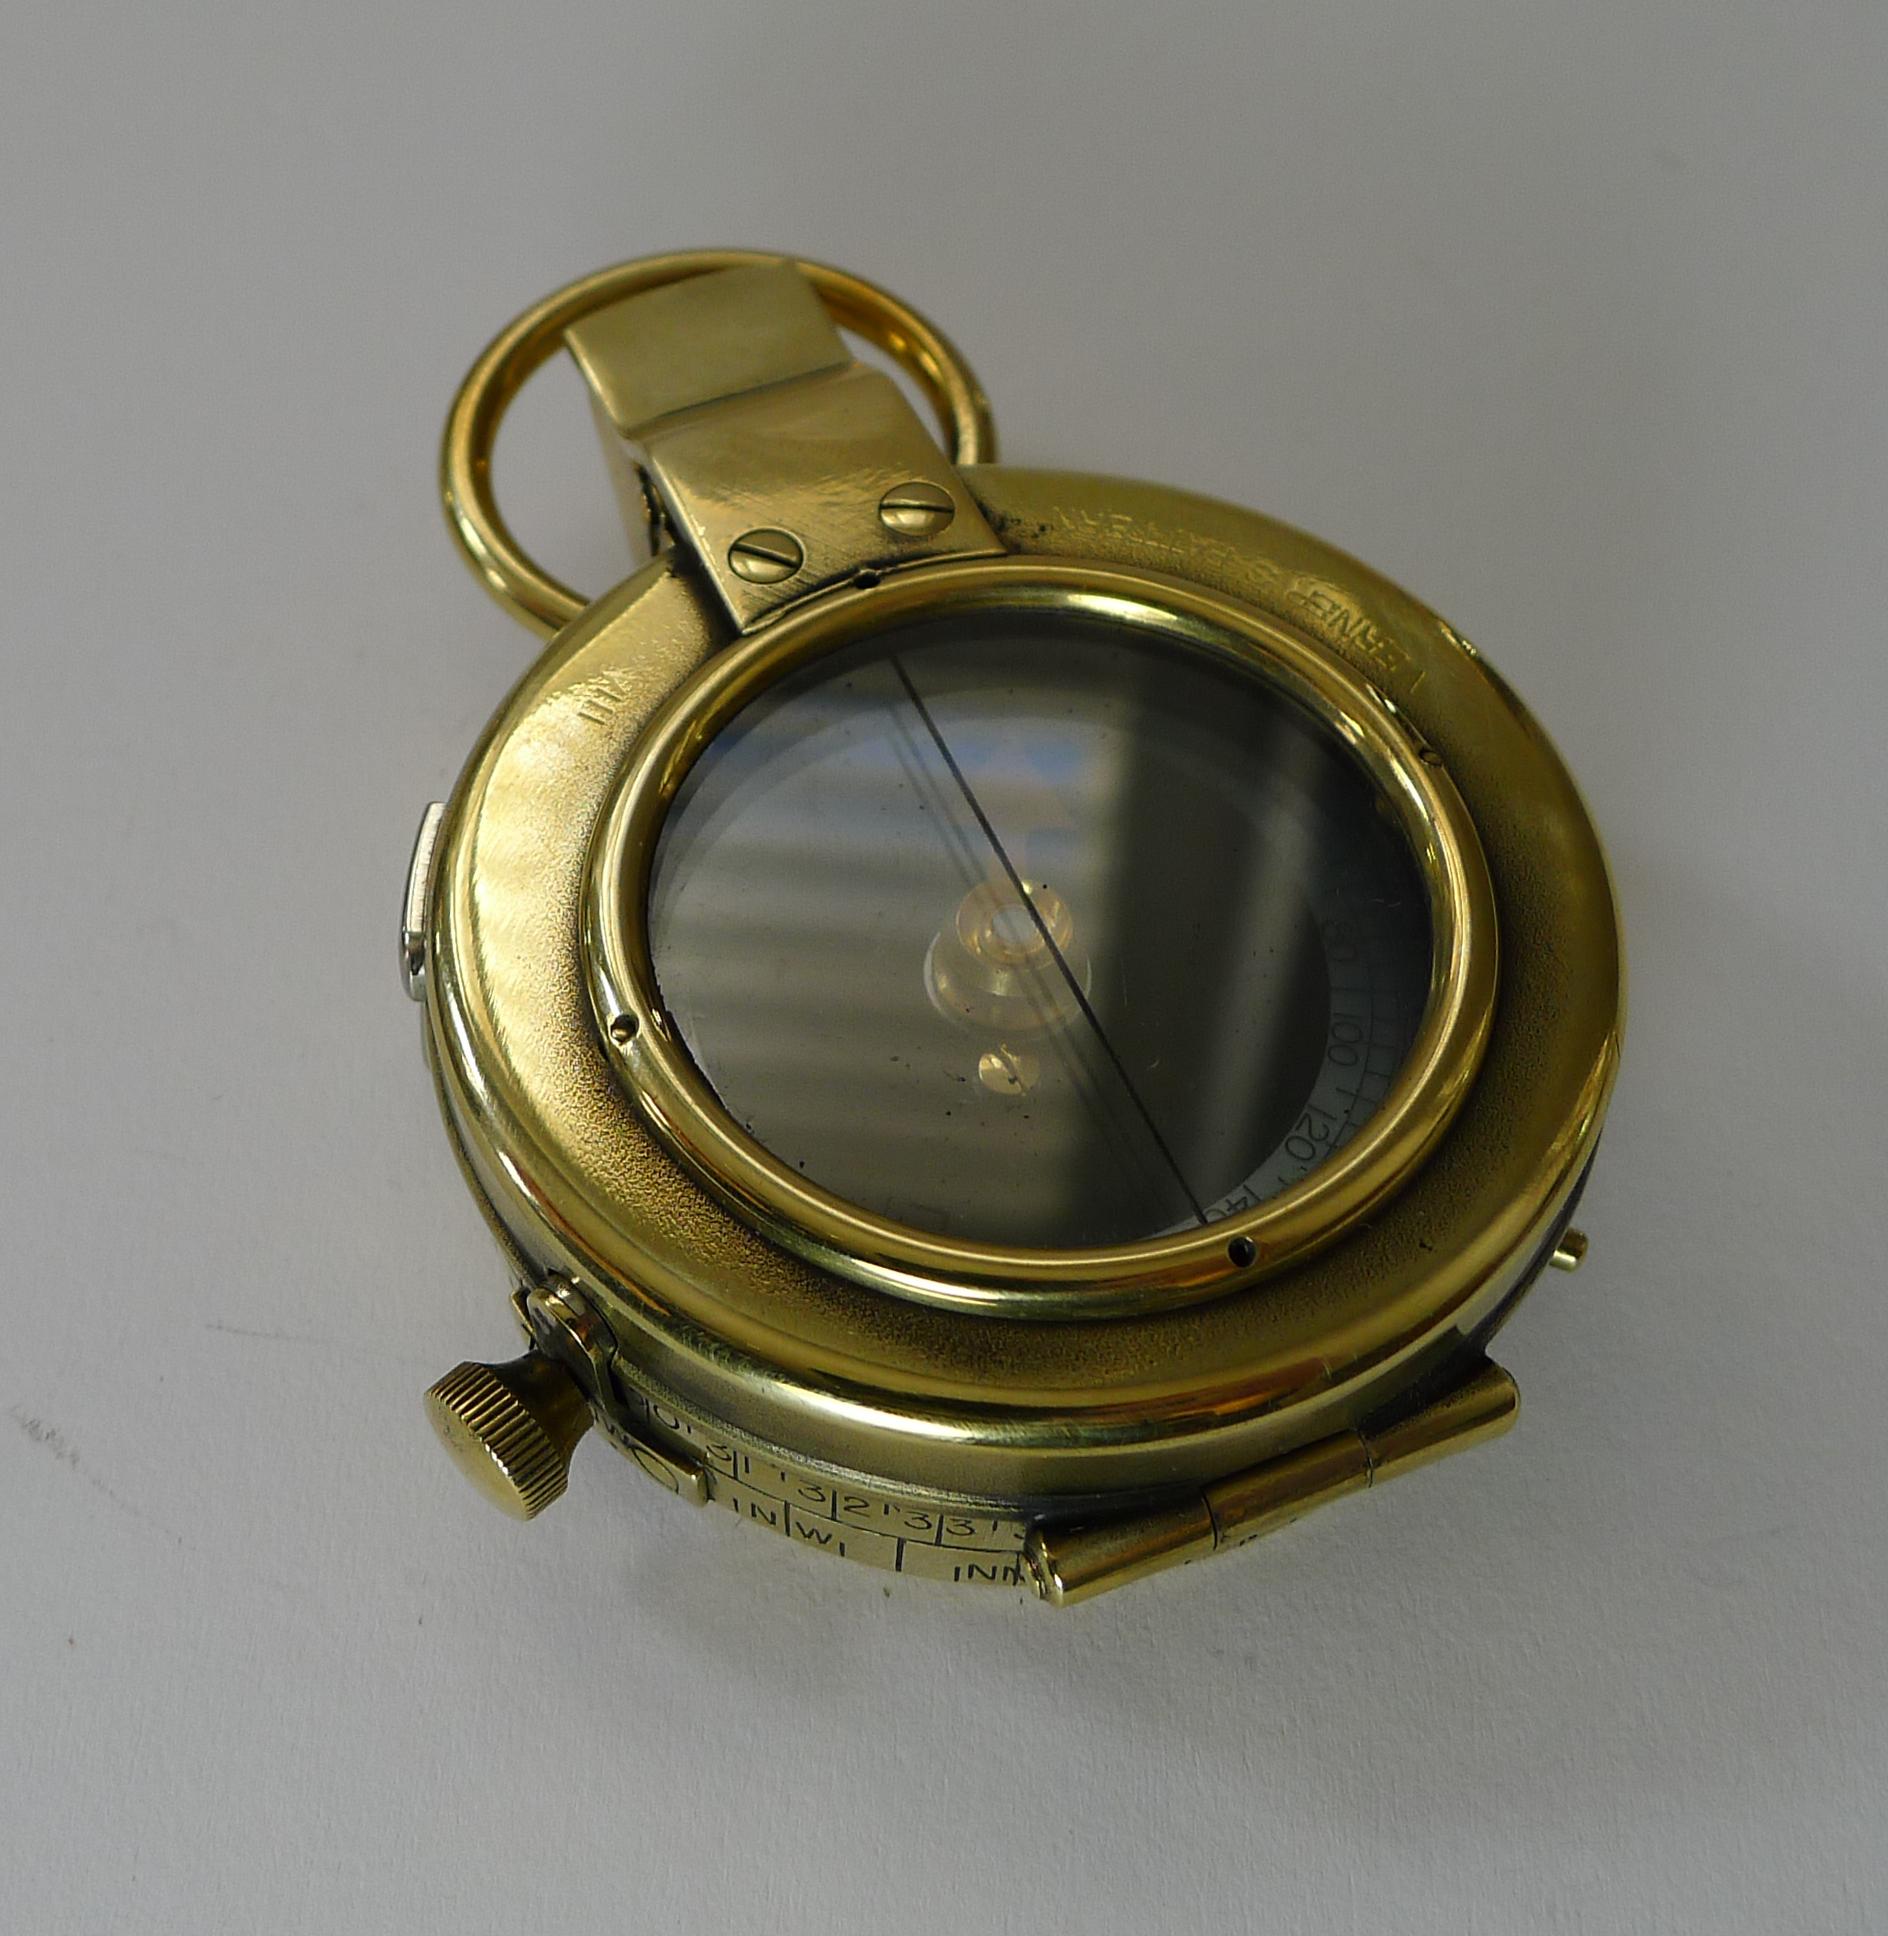 WWI 1917 British Army Officer's Compass, Verner's Patent Mk viii by French Ltd 1